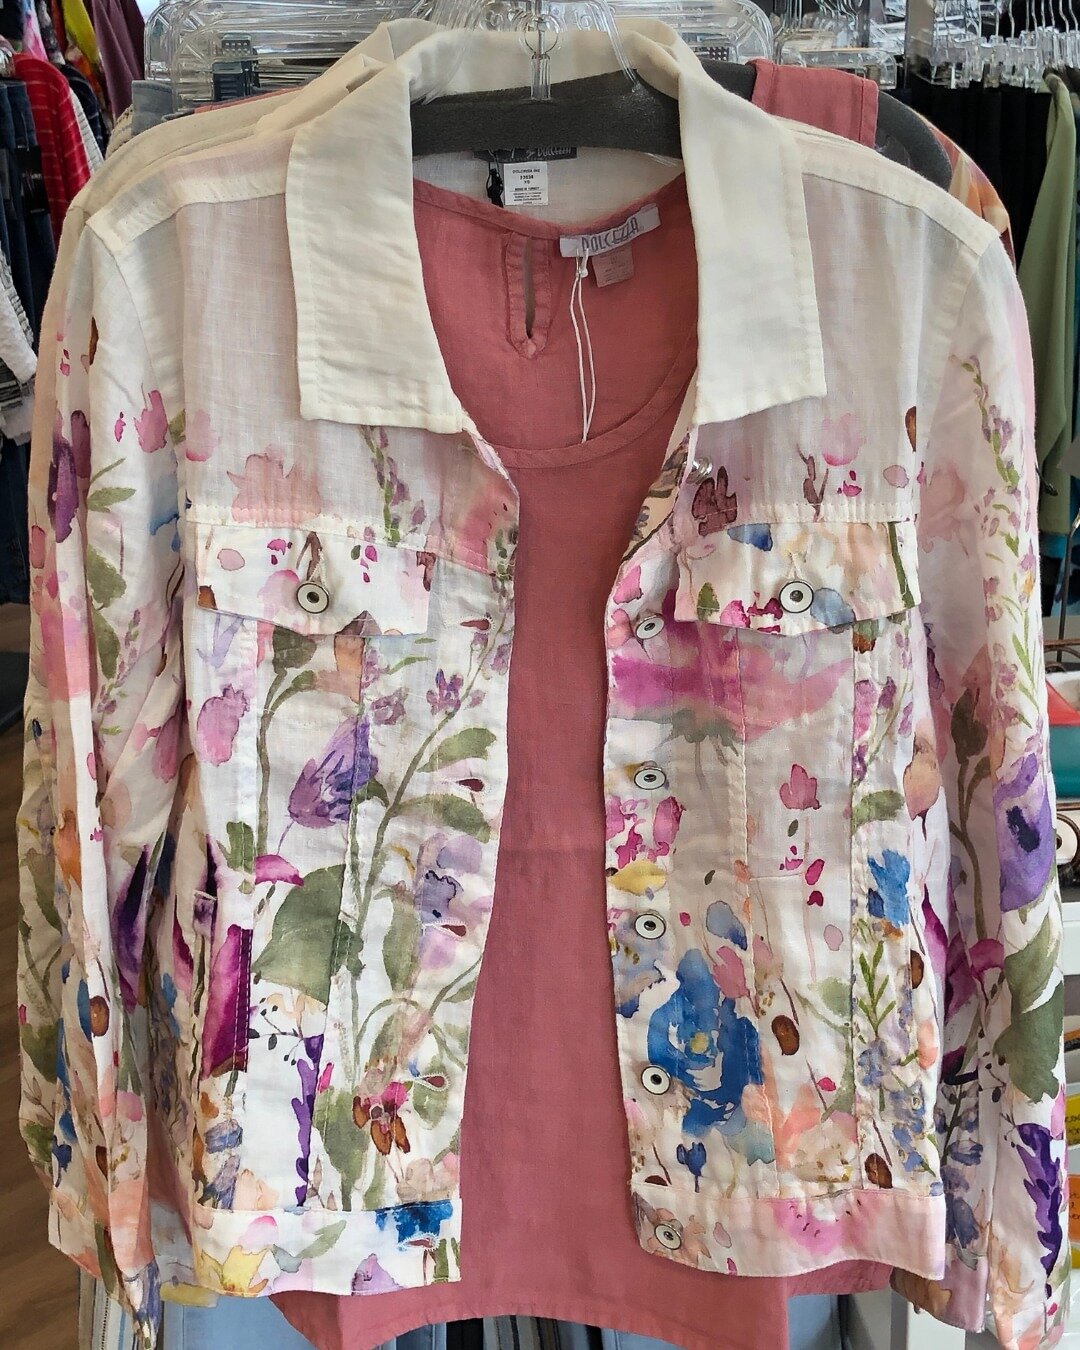 This stunning white jacket with watercolor floral details is the perfect way to add a pop of color to any outfit. Dress it up or down, this versatile piece is a wardrobe staple! 🌸🌿